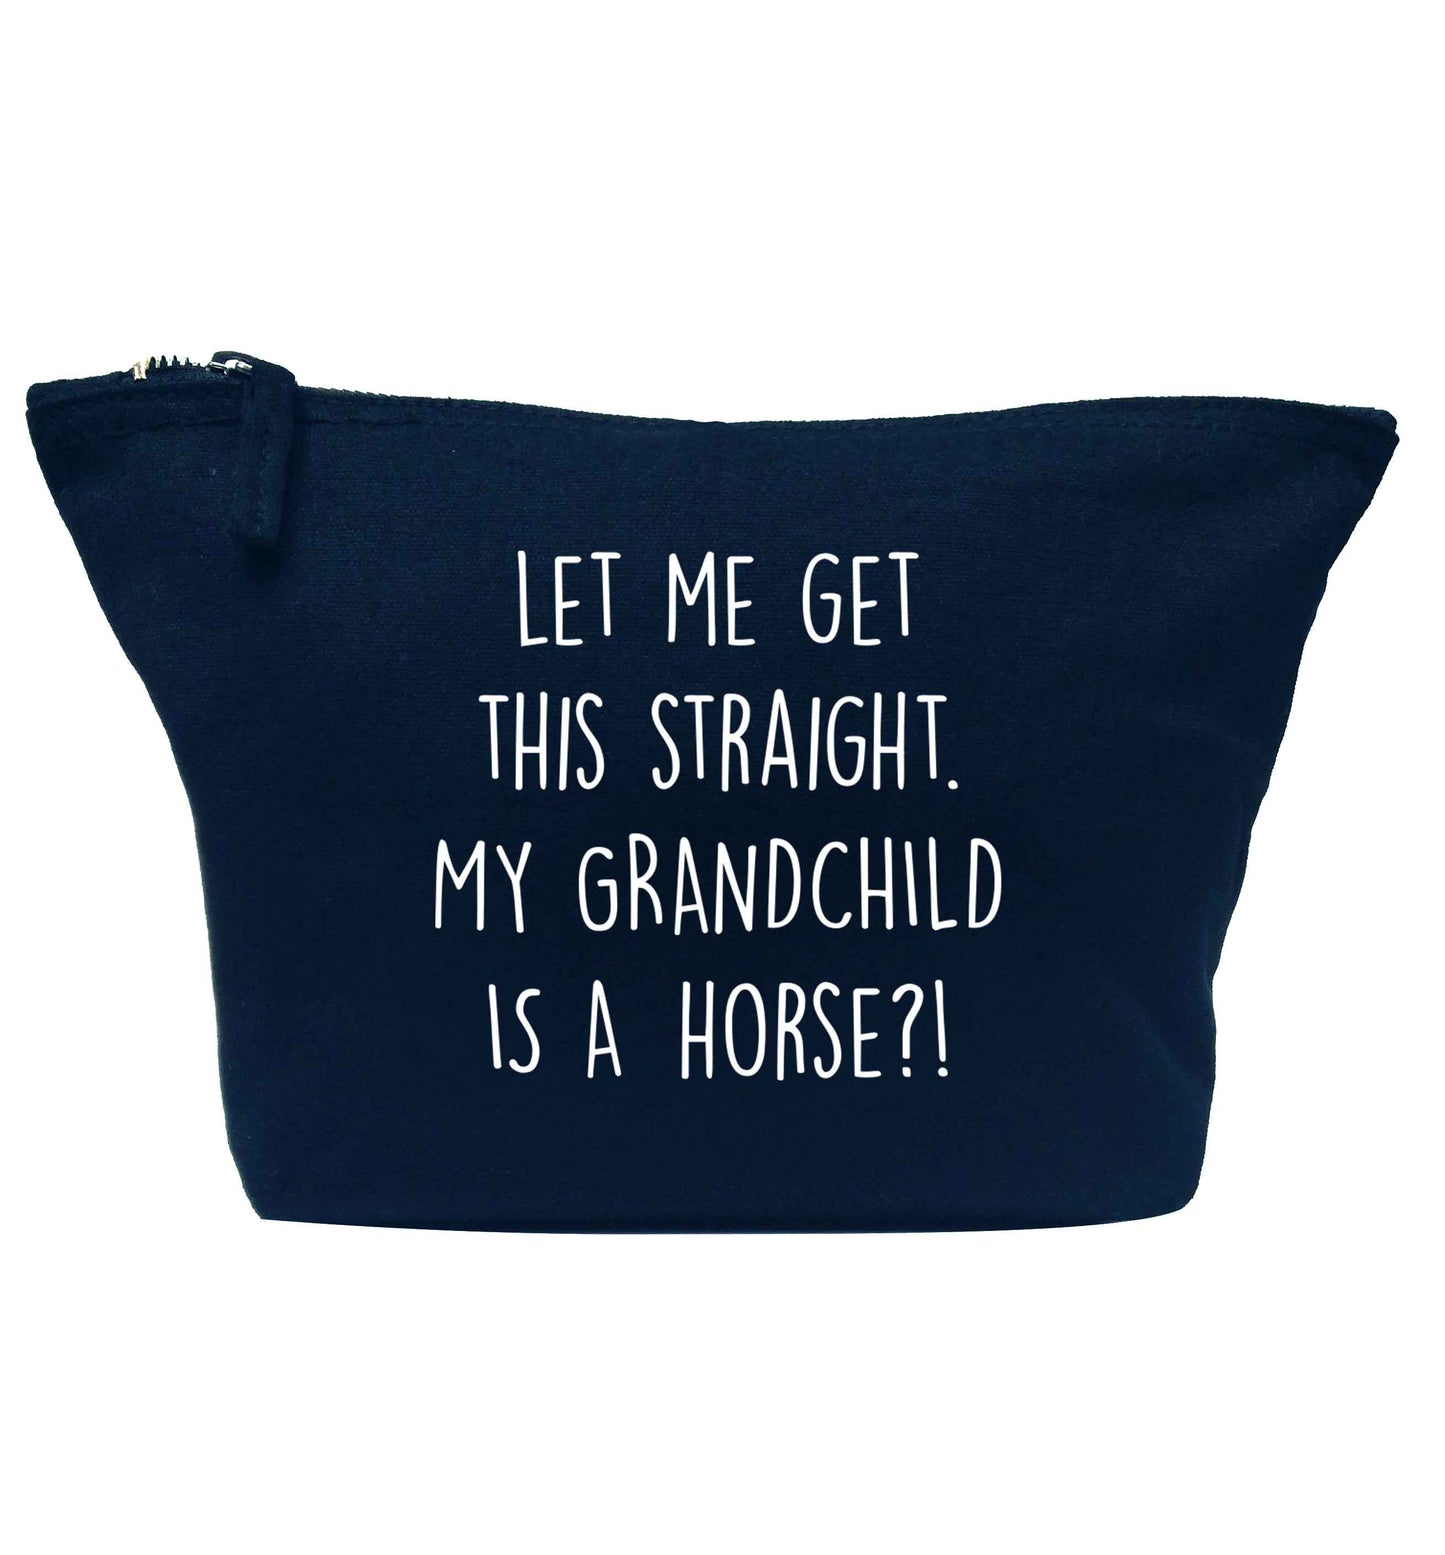 Let me get this straight, my grandchild is a horse?! navy makeup bag